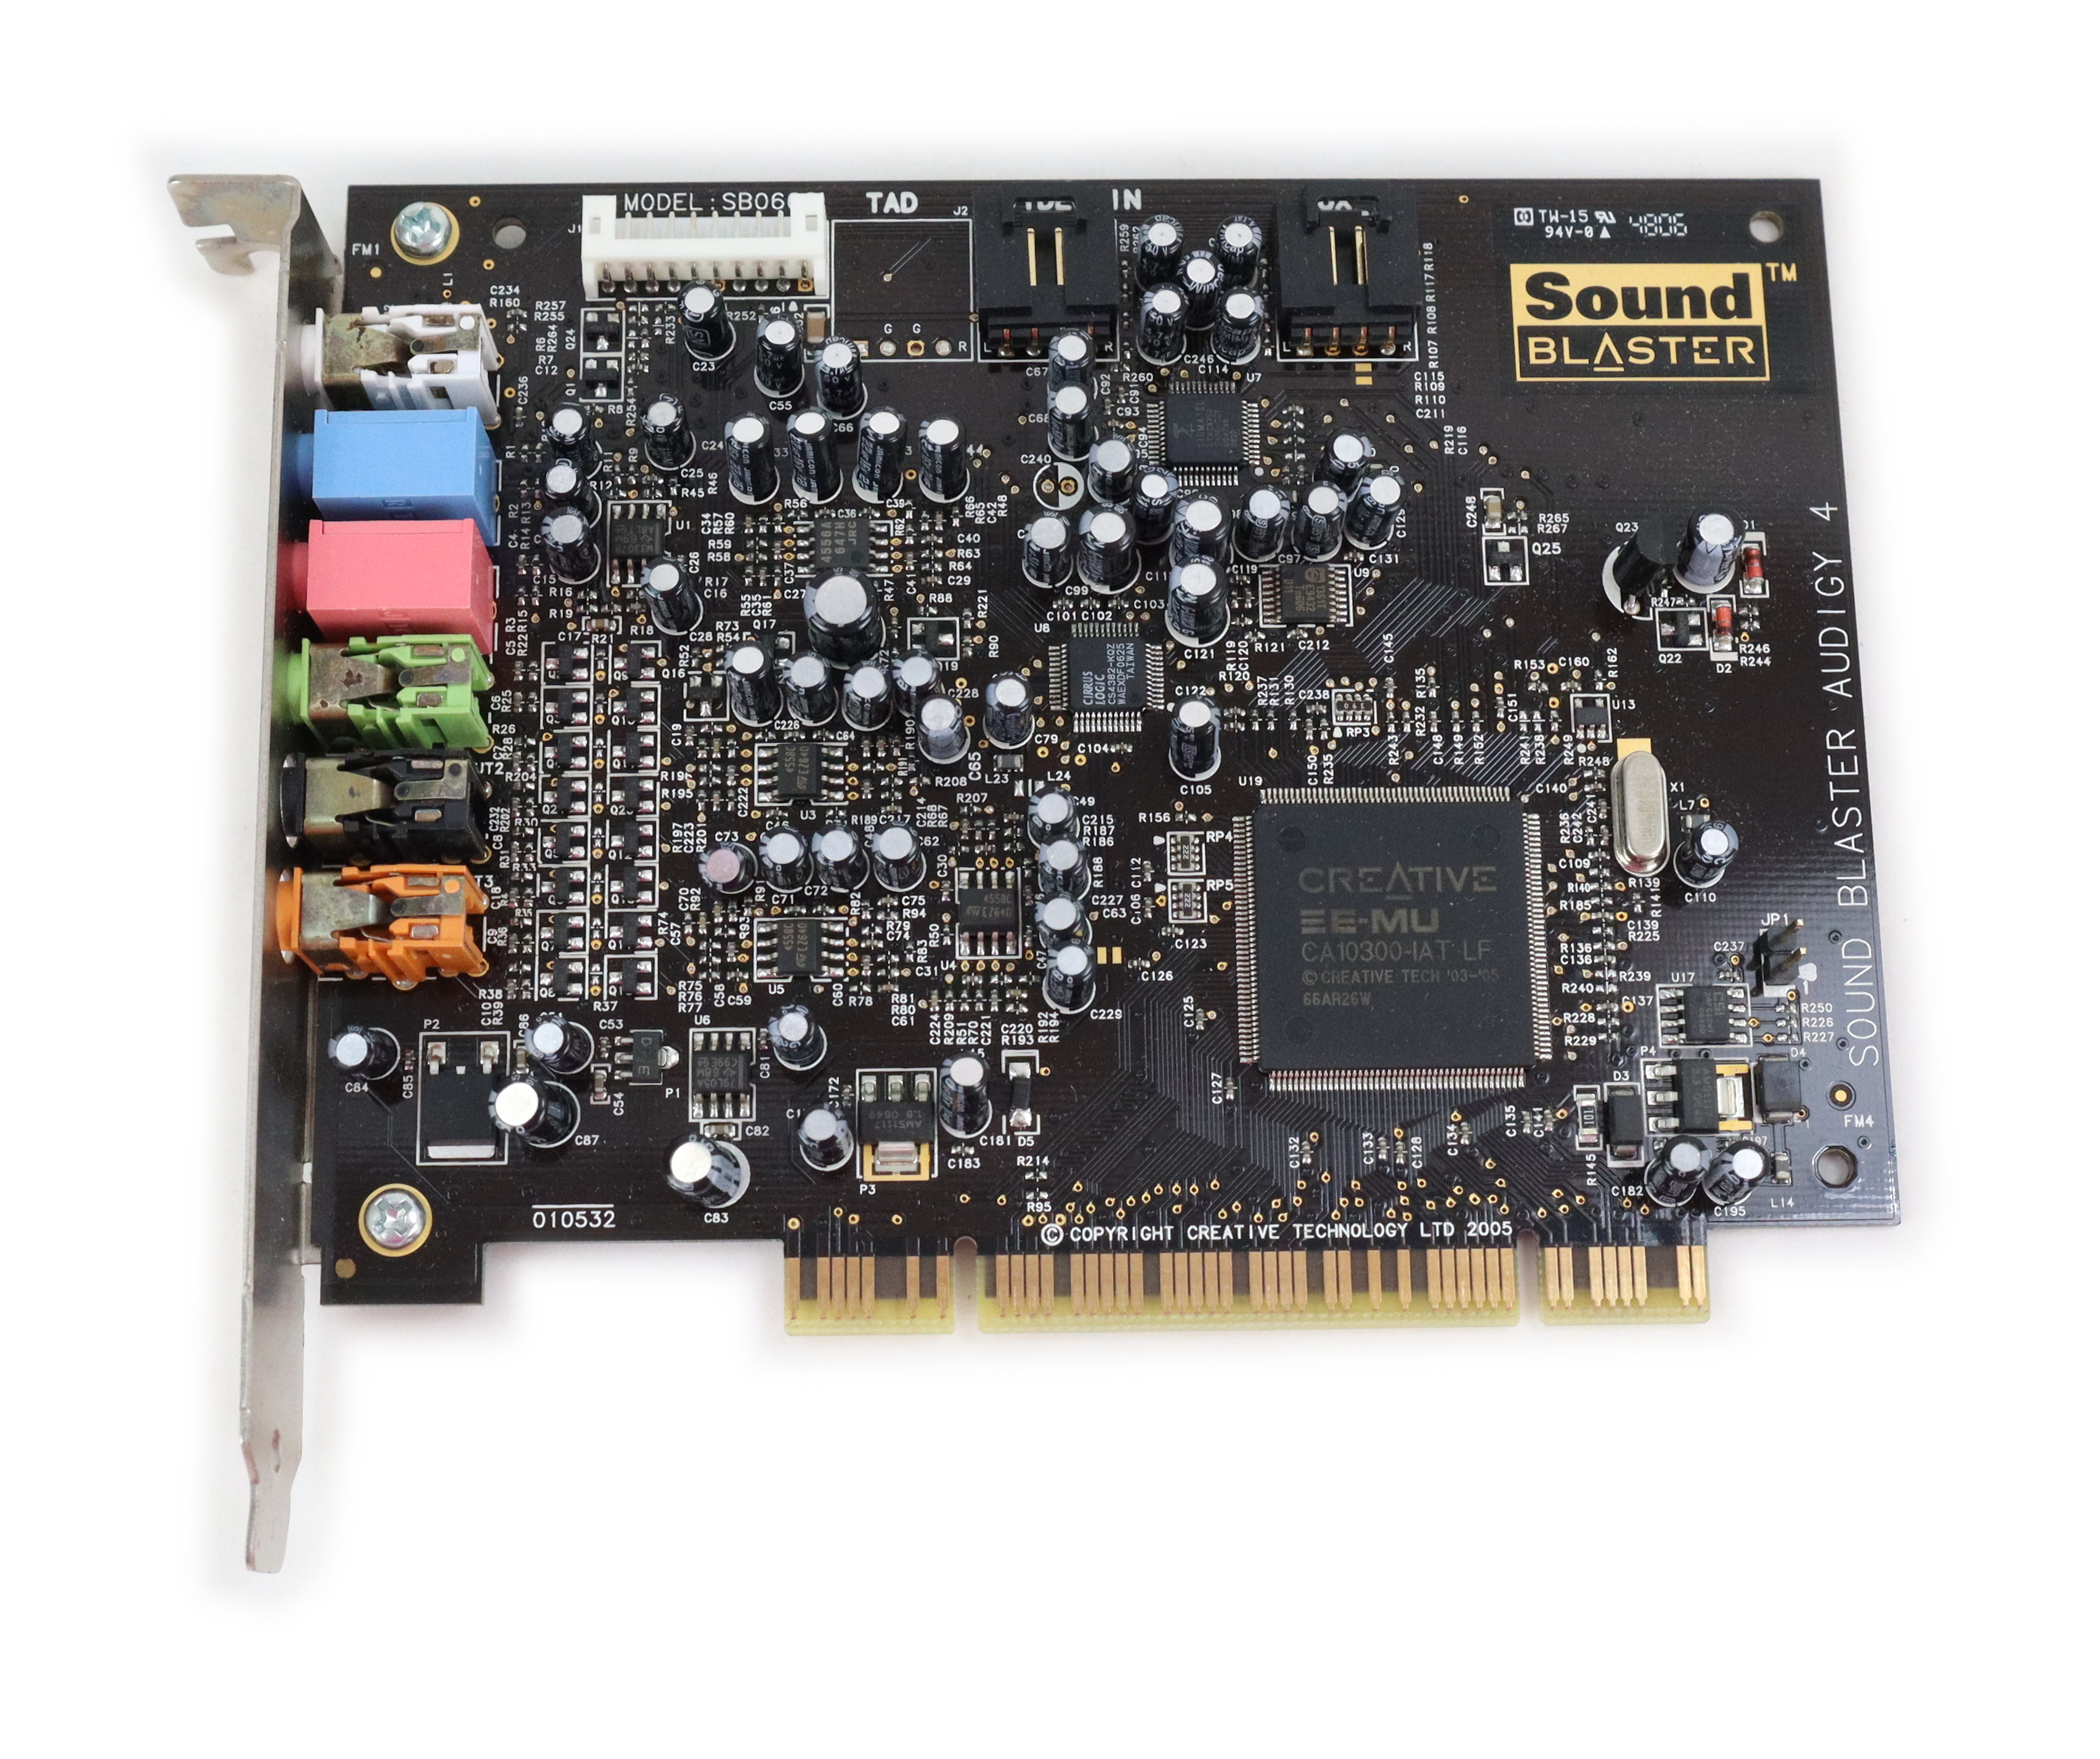 Creative Labs Sound Blaster Audigy 4 Channels 7.1 PCI Sound Card 5188-4455 SB0660